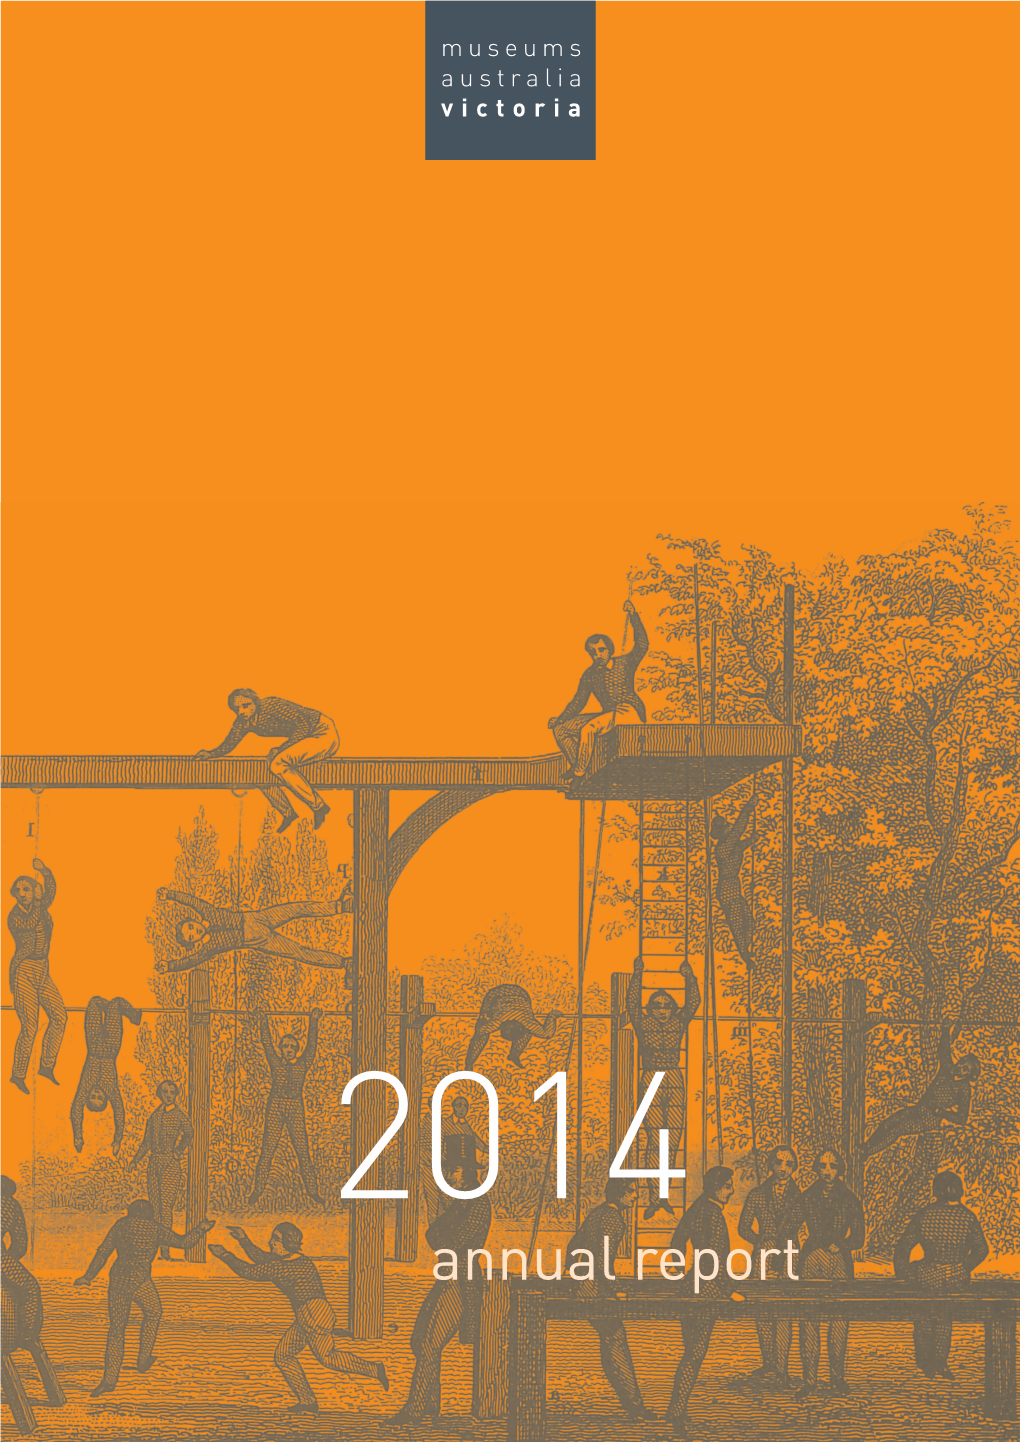 Download the 2014 Annual Report